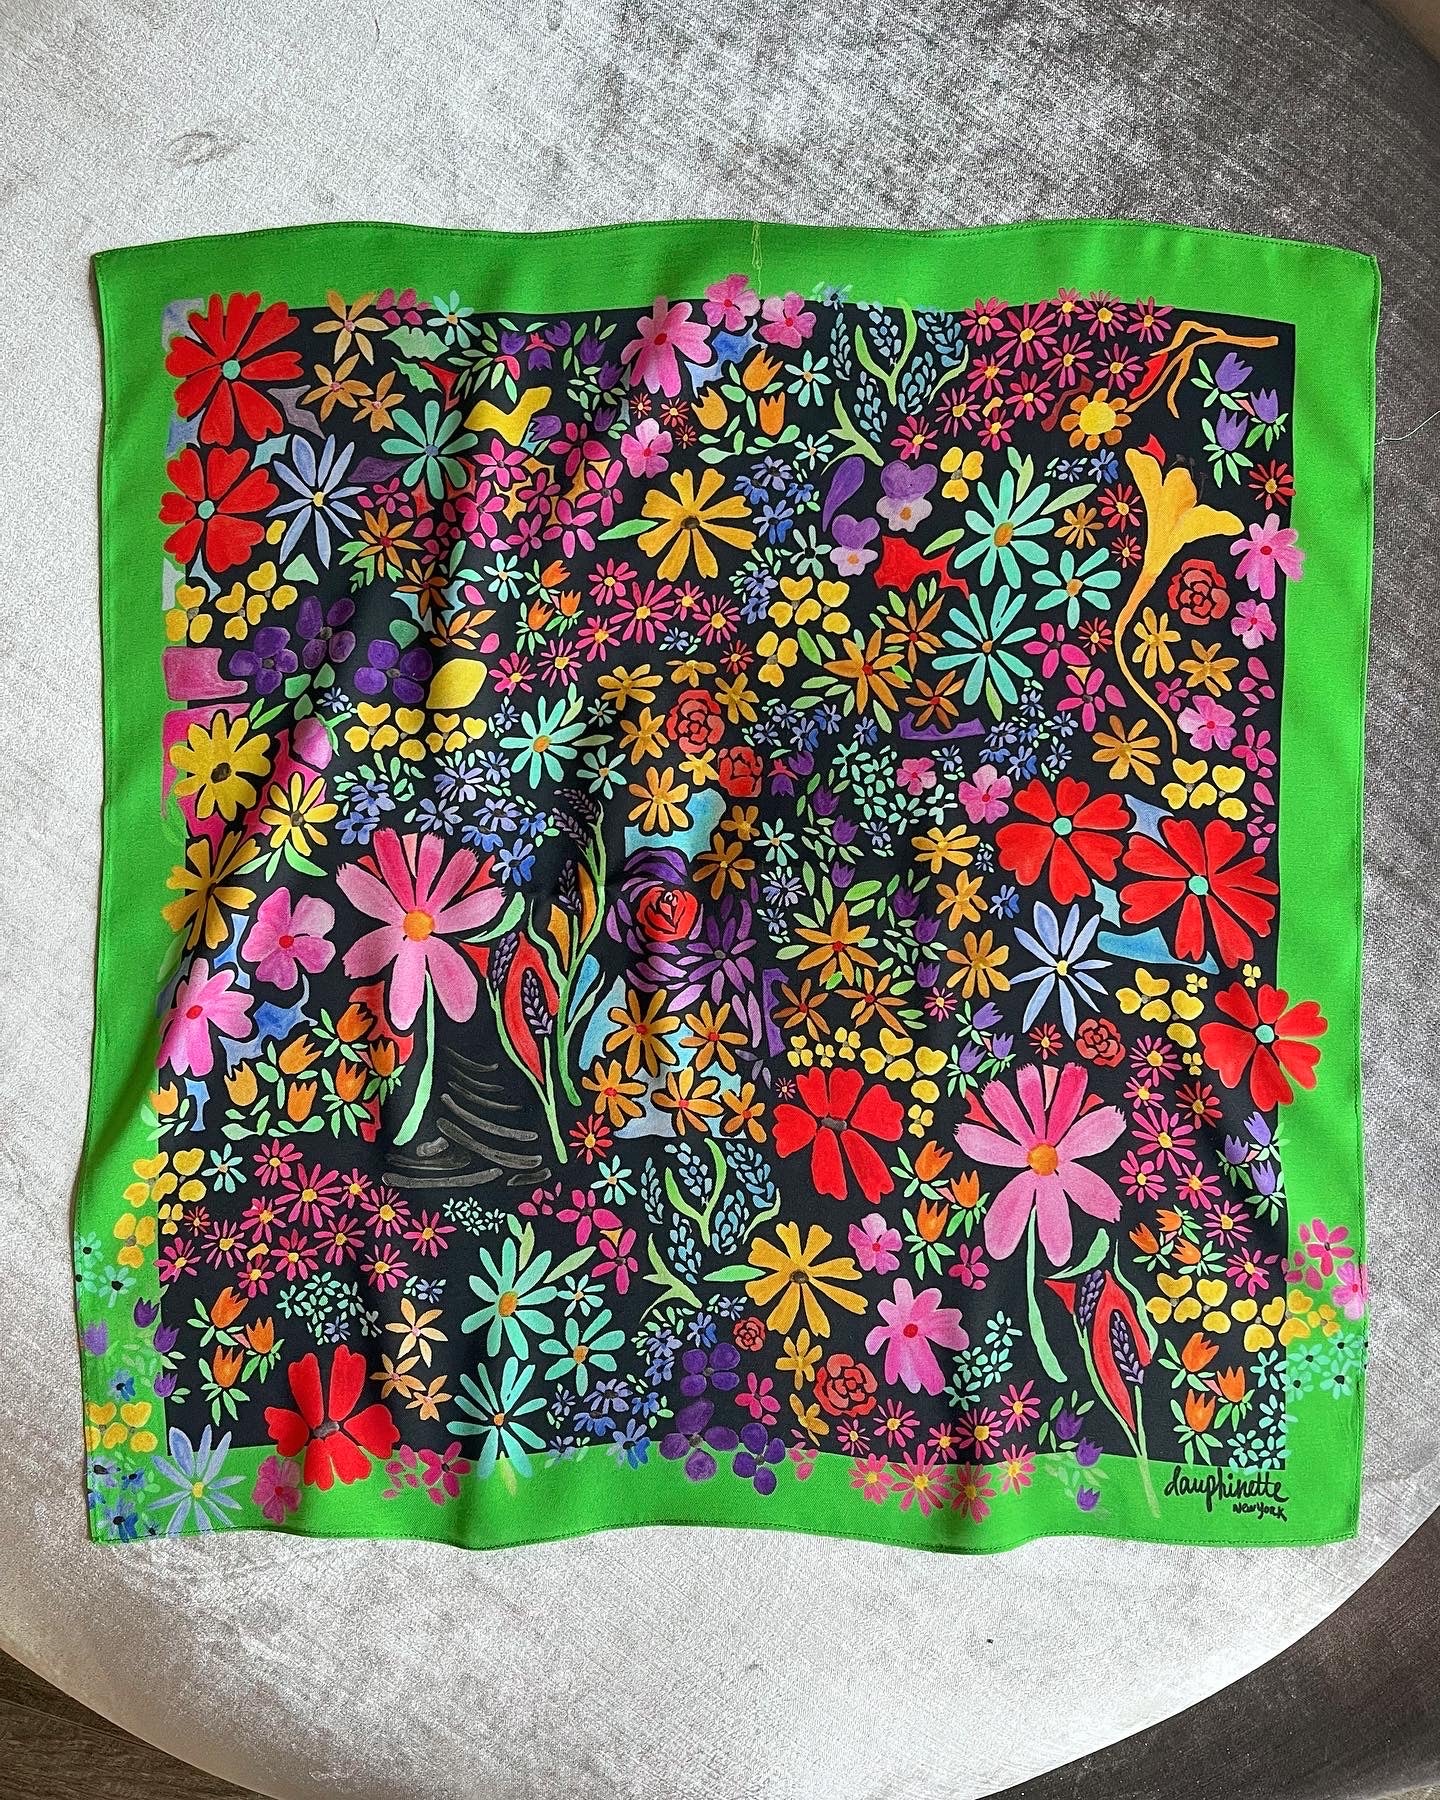 Olivia's and painted multicolored floral "wonderland" print on scarf